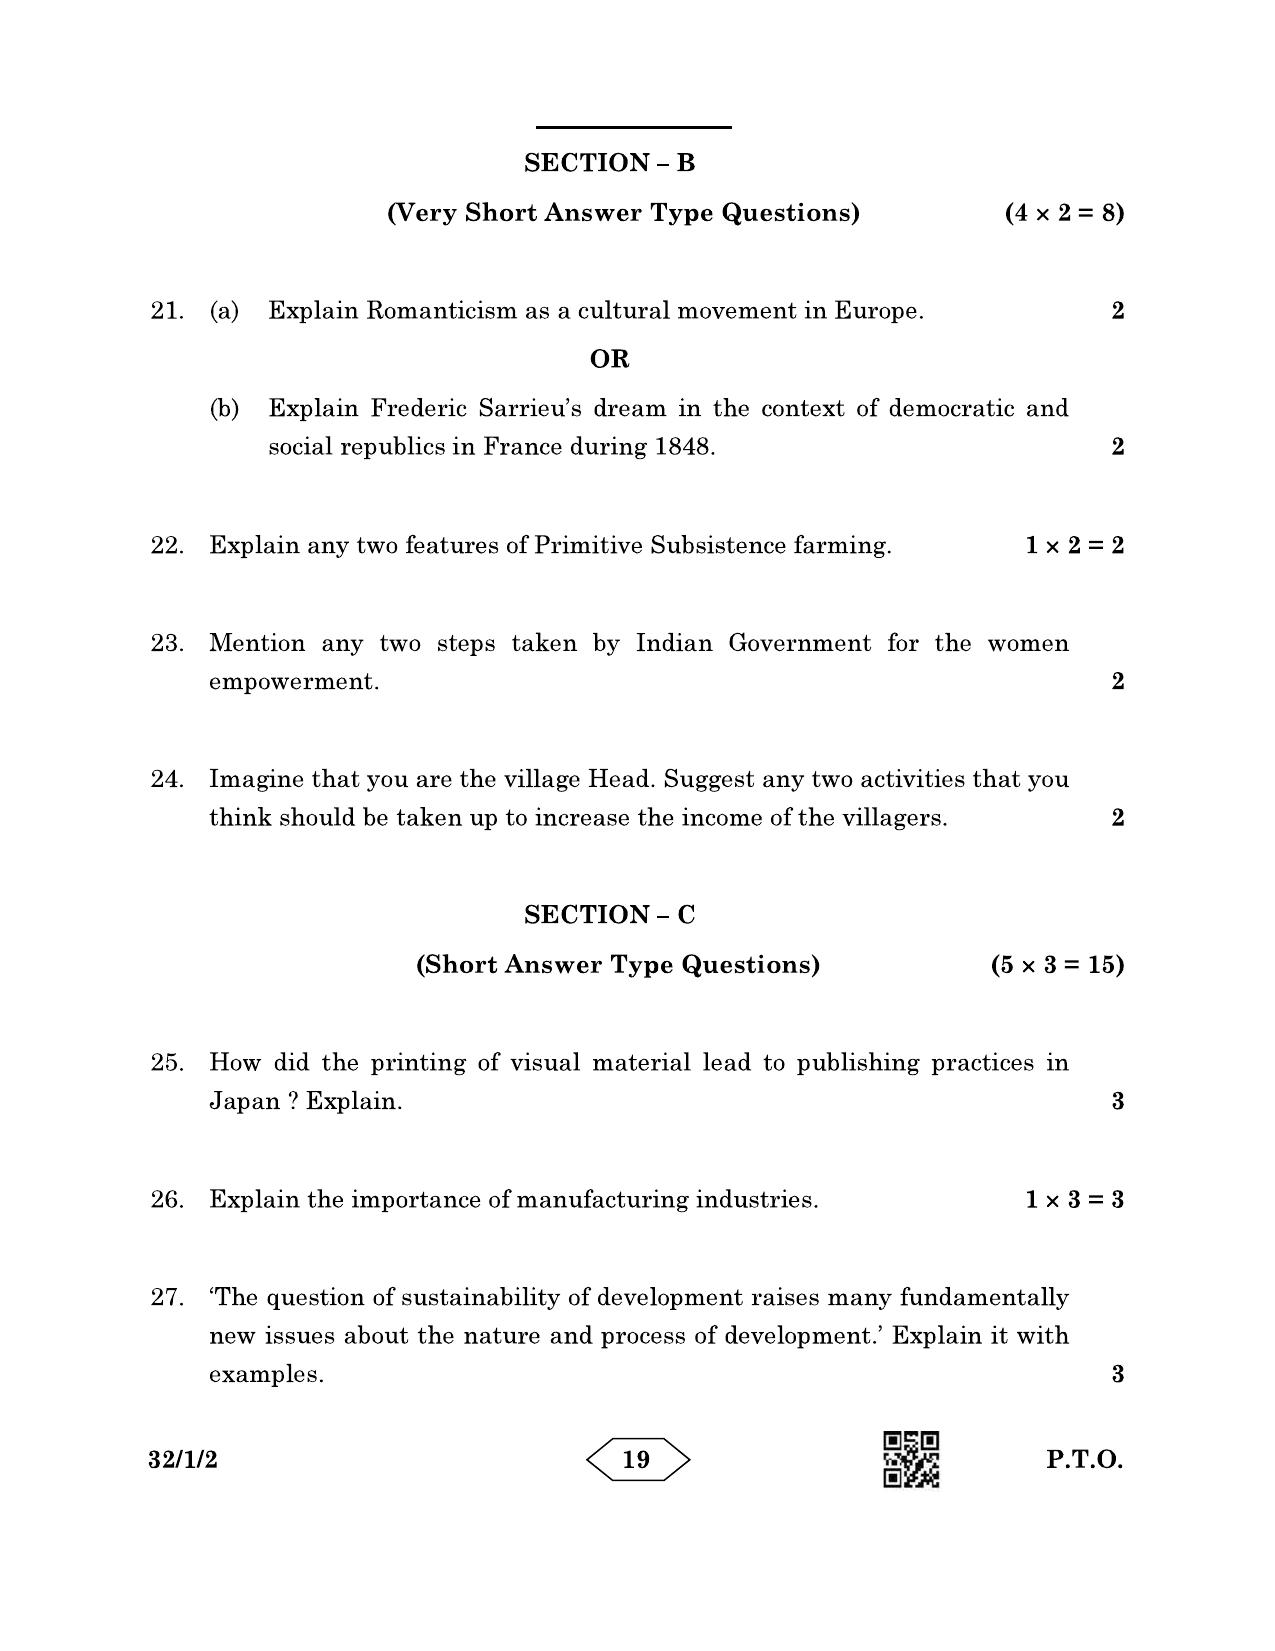 CBSE Class 10 32-1-2 Social Science 2023 Question Paper - Page 19